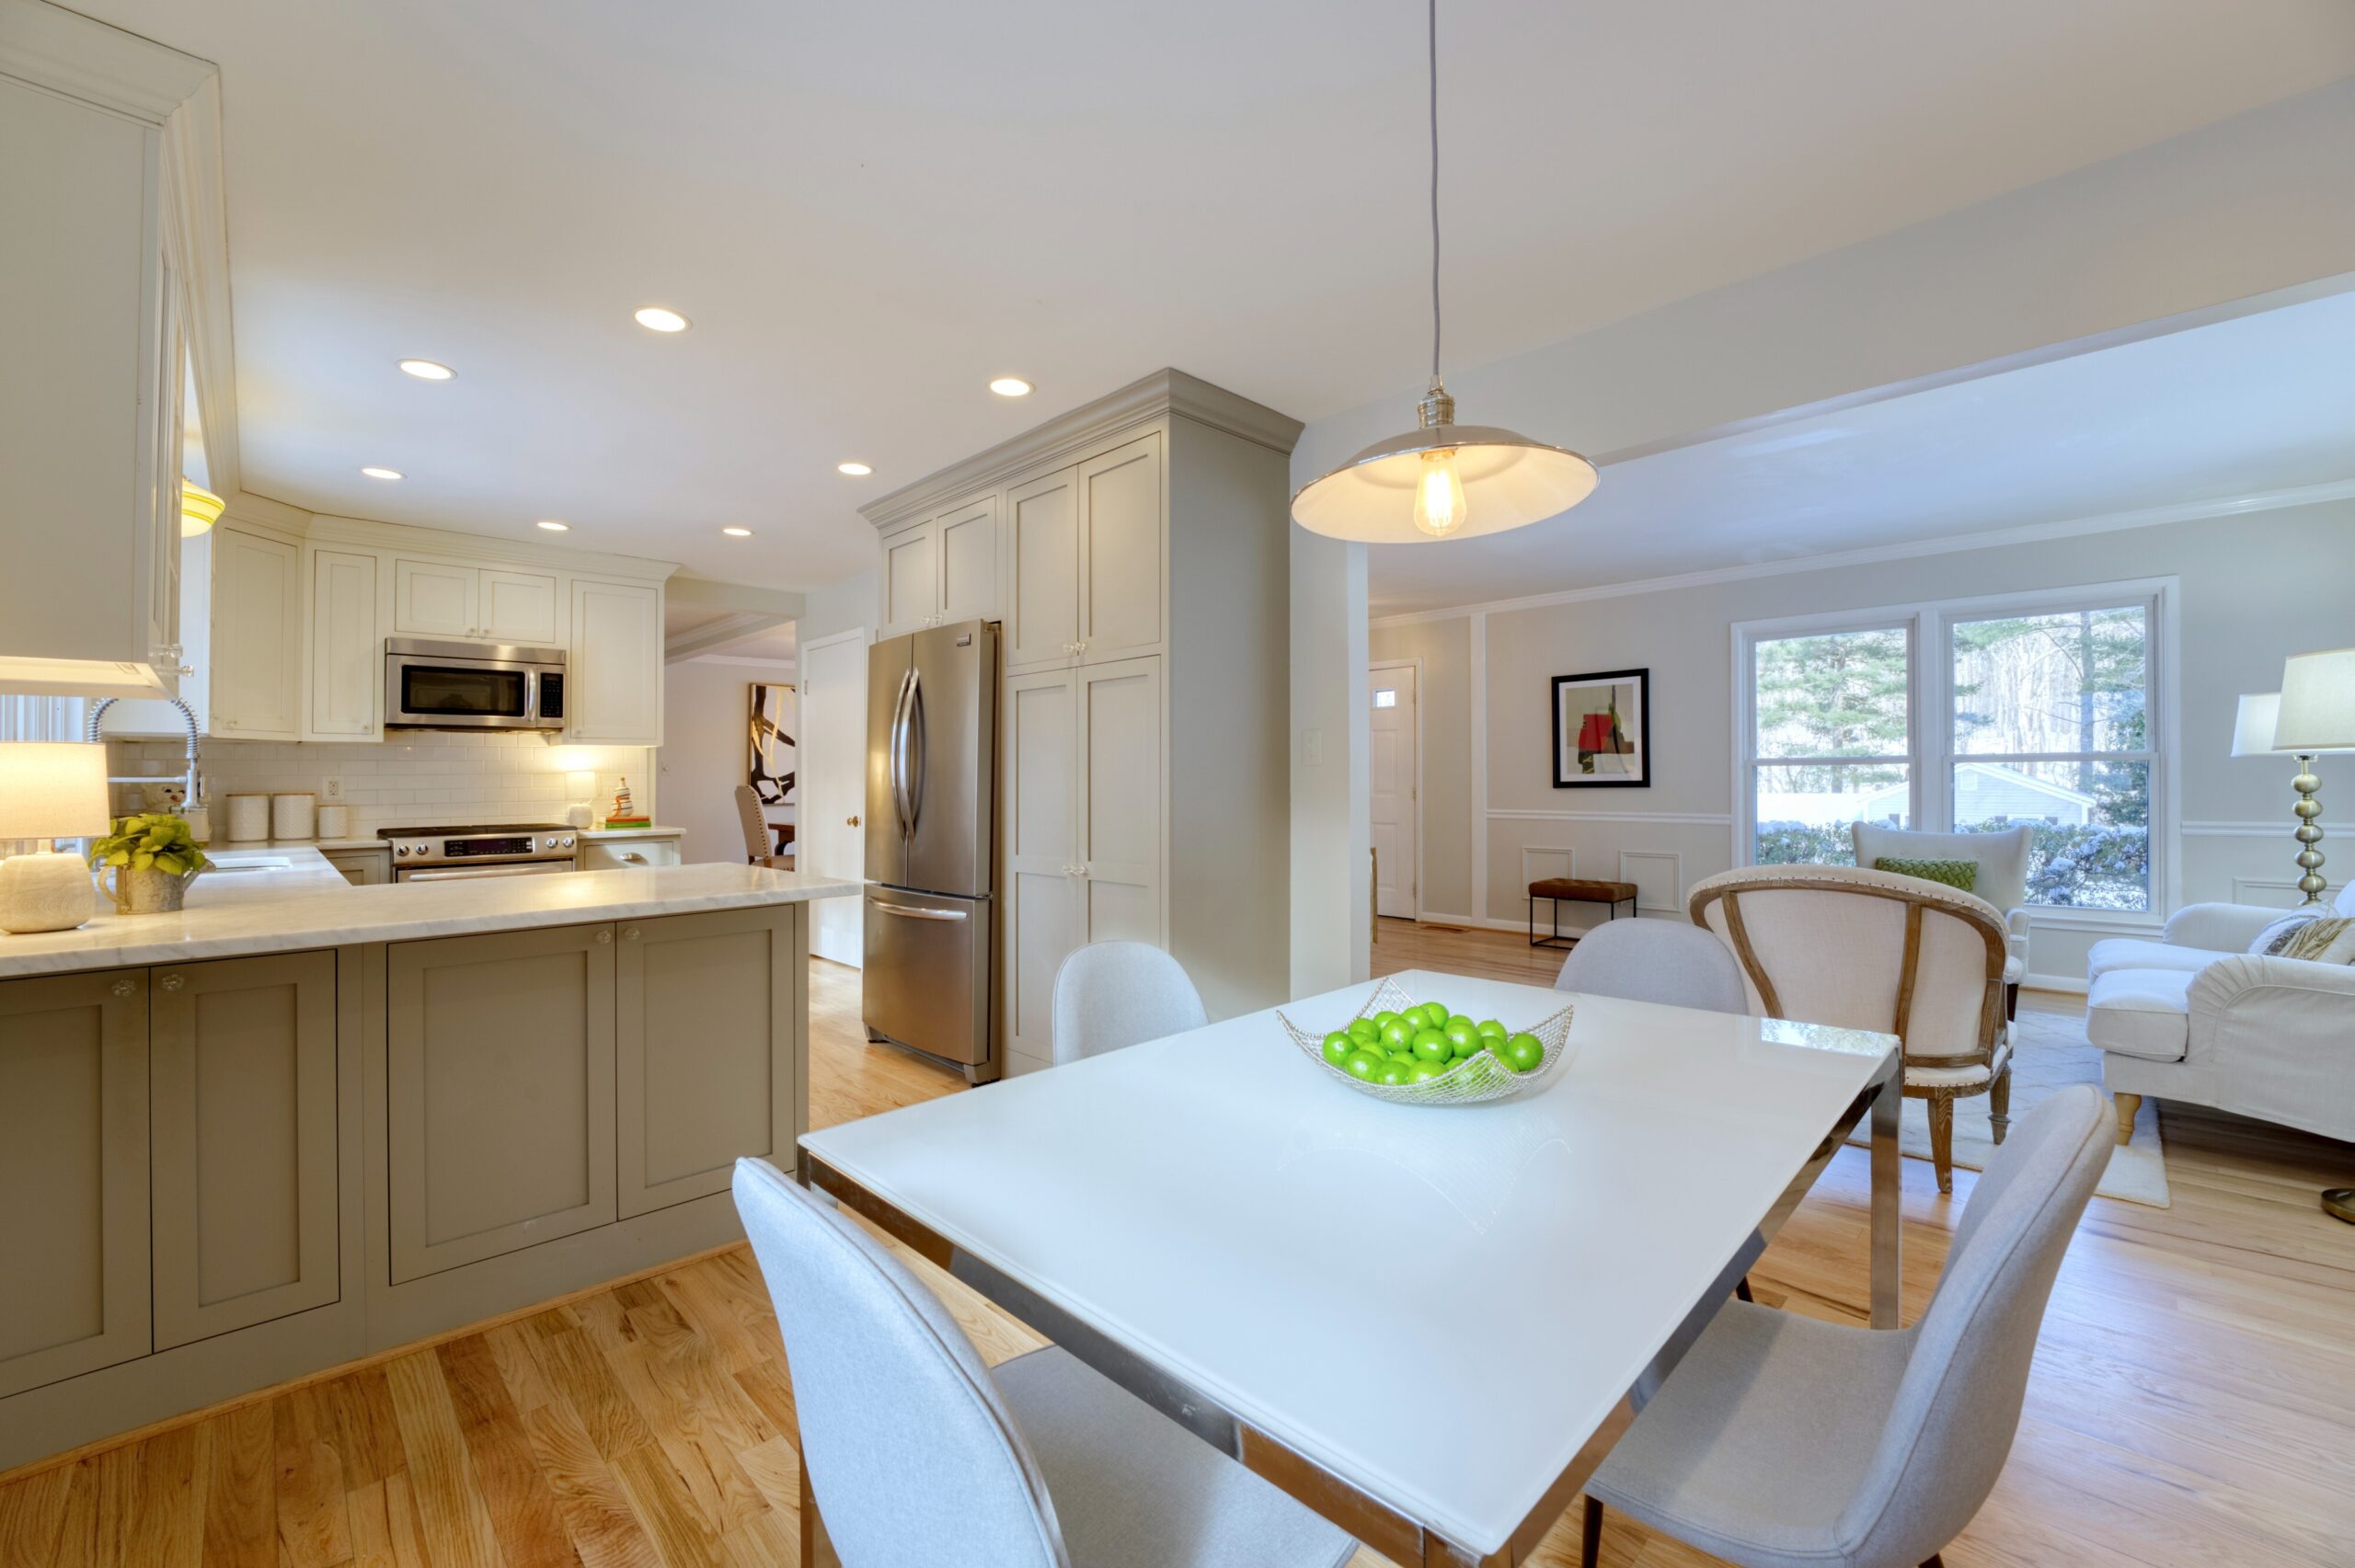 Professional interior photo of 9515 Center St in Vienna, Virginia - showing the kitchen in the background behind the kitchen eating area